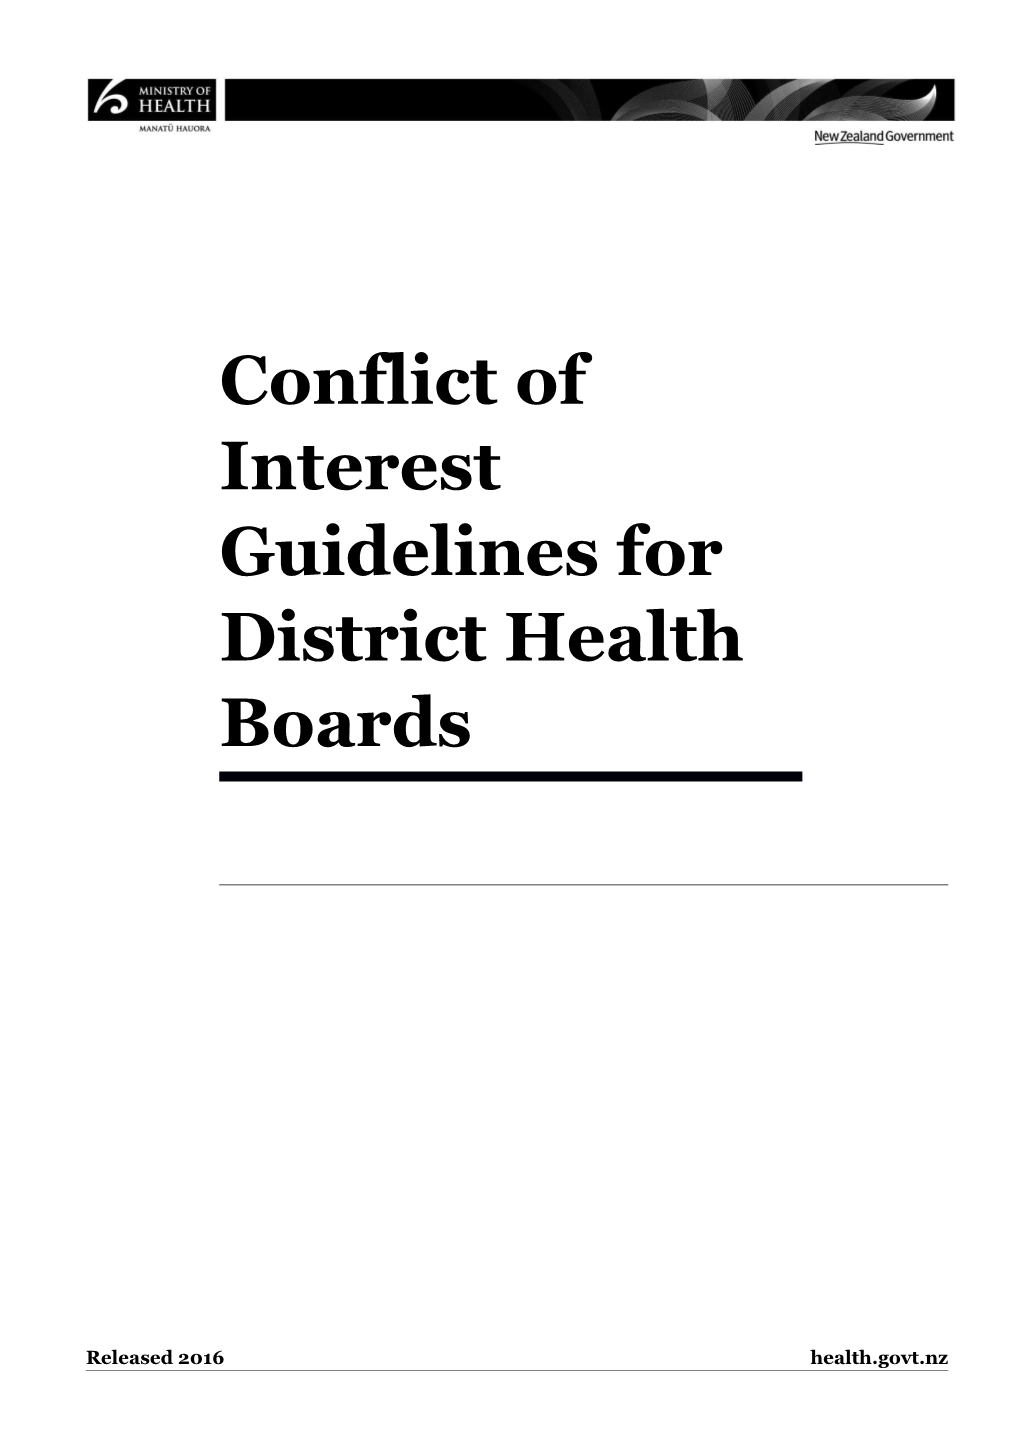 Conflict of Interest Guidelines for District Health Boards